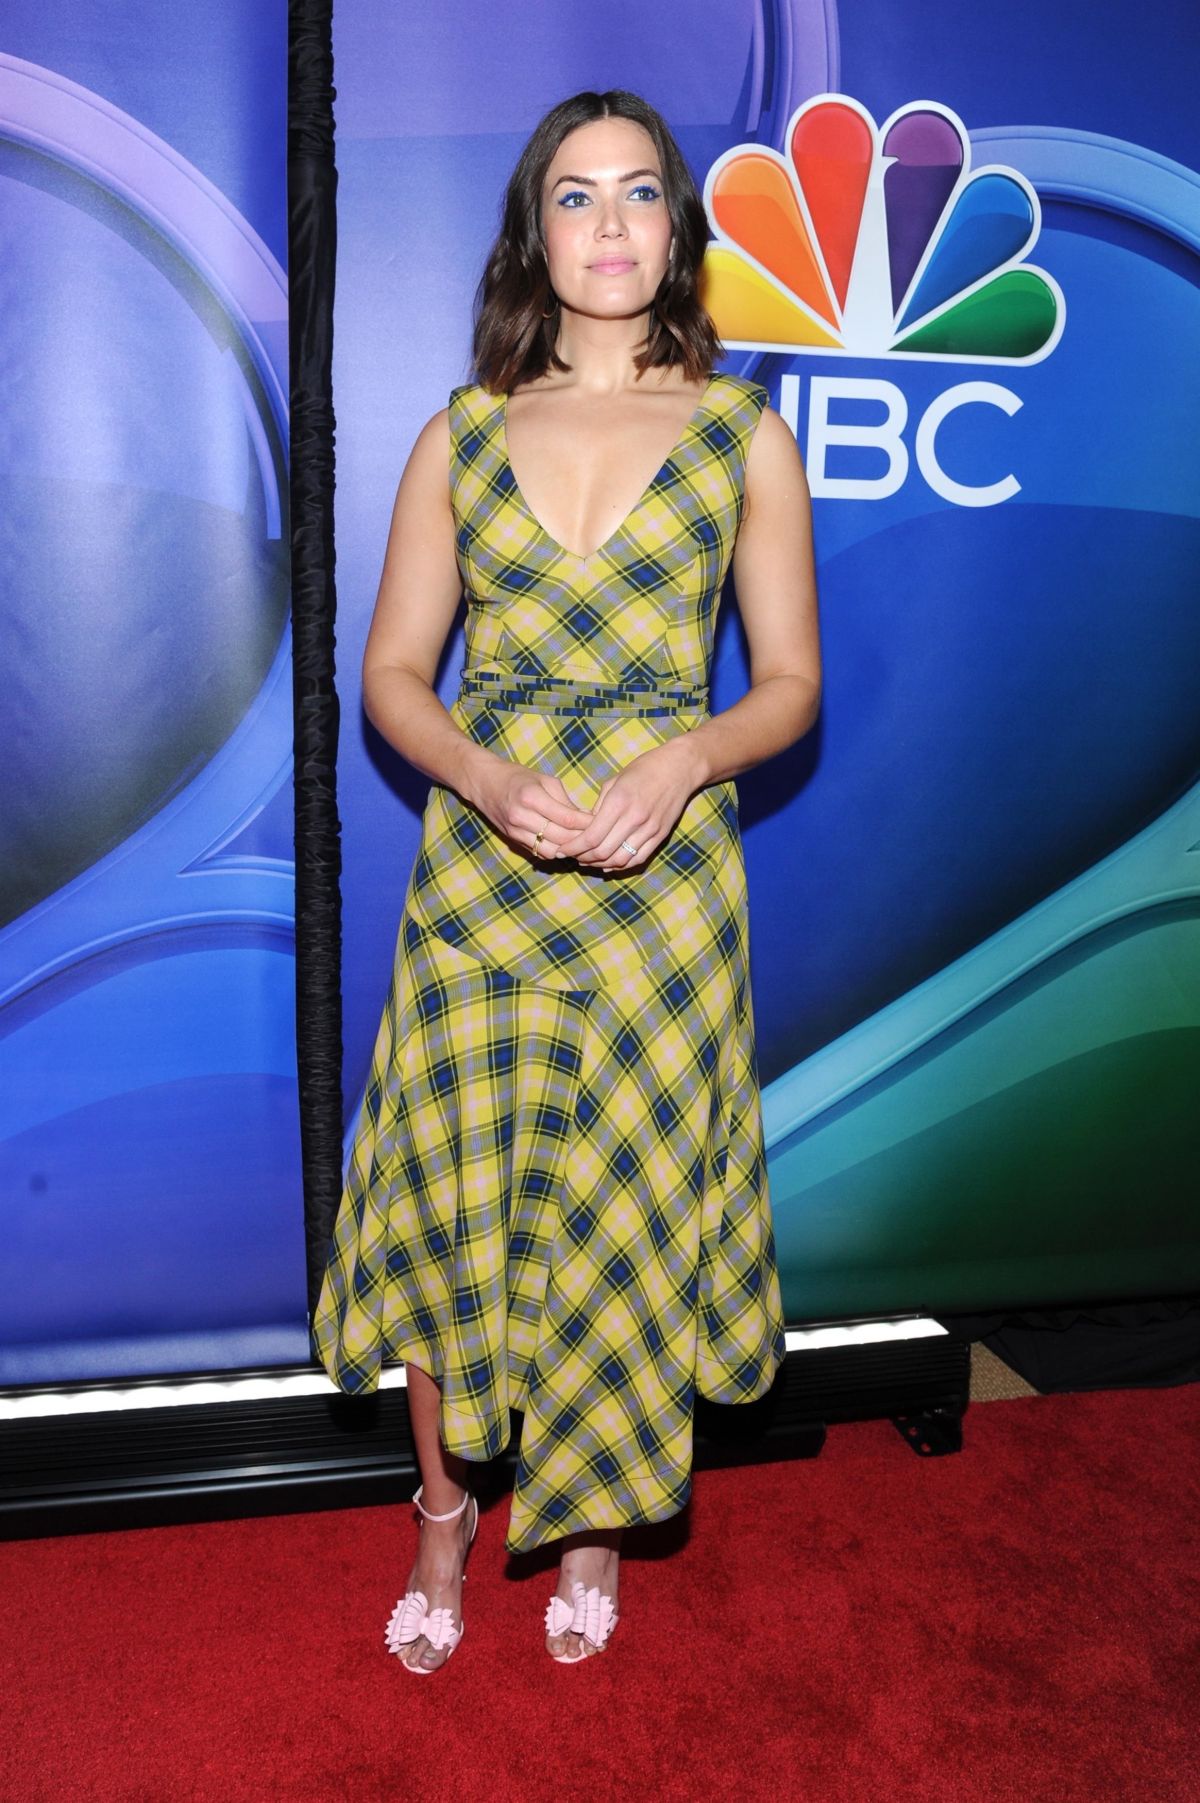 MANDY MOORE at NBCUniversal Upfront Presentation in New York 05/13/2019 ...